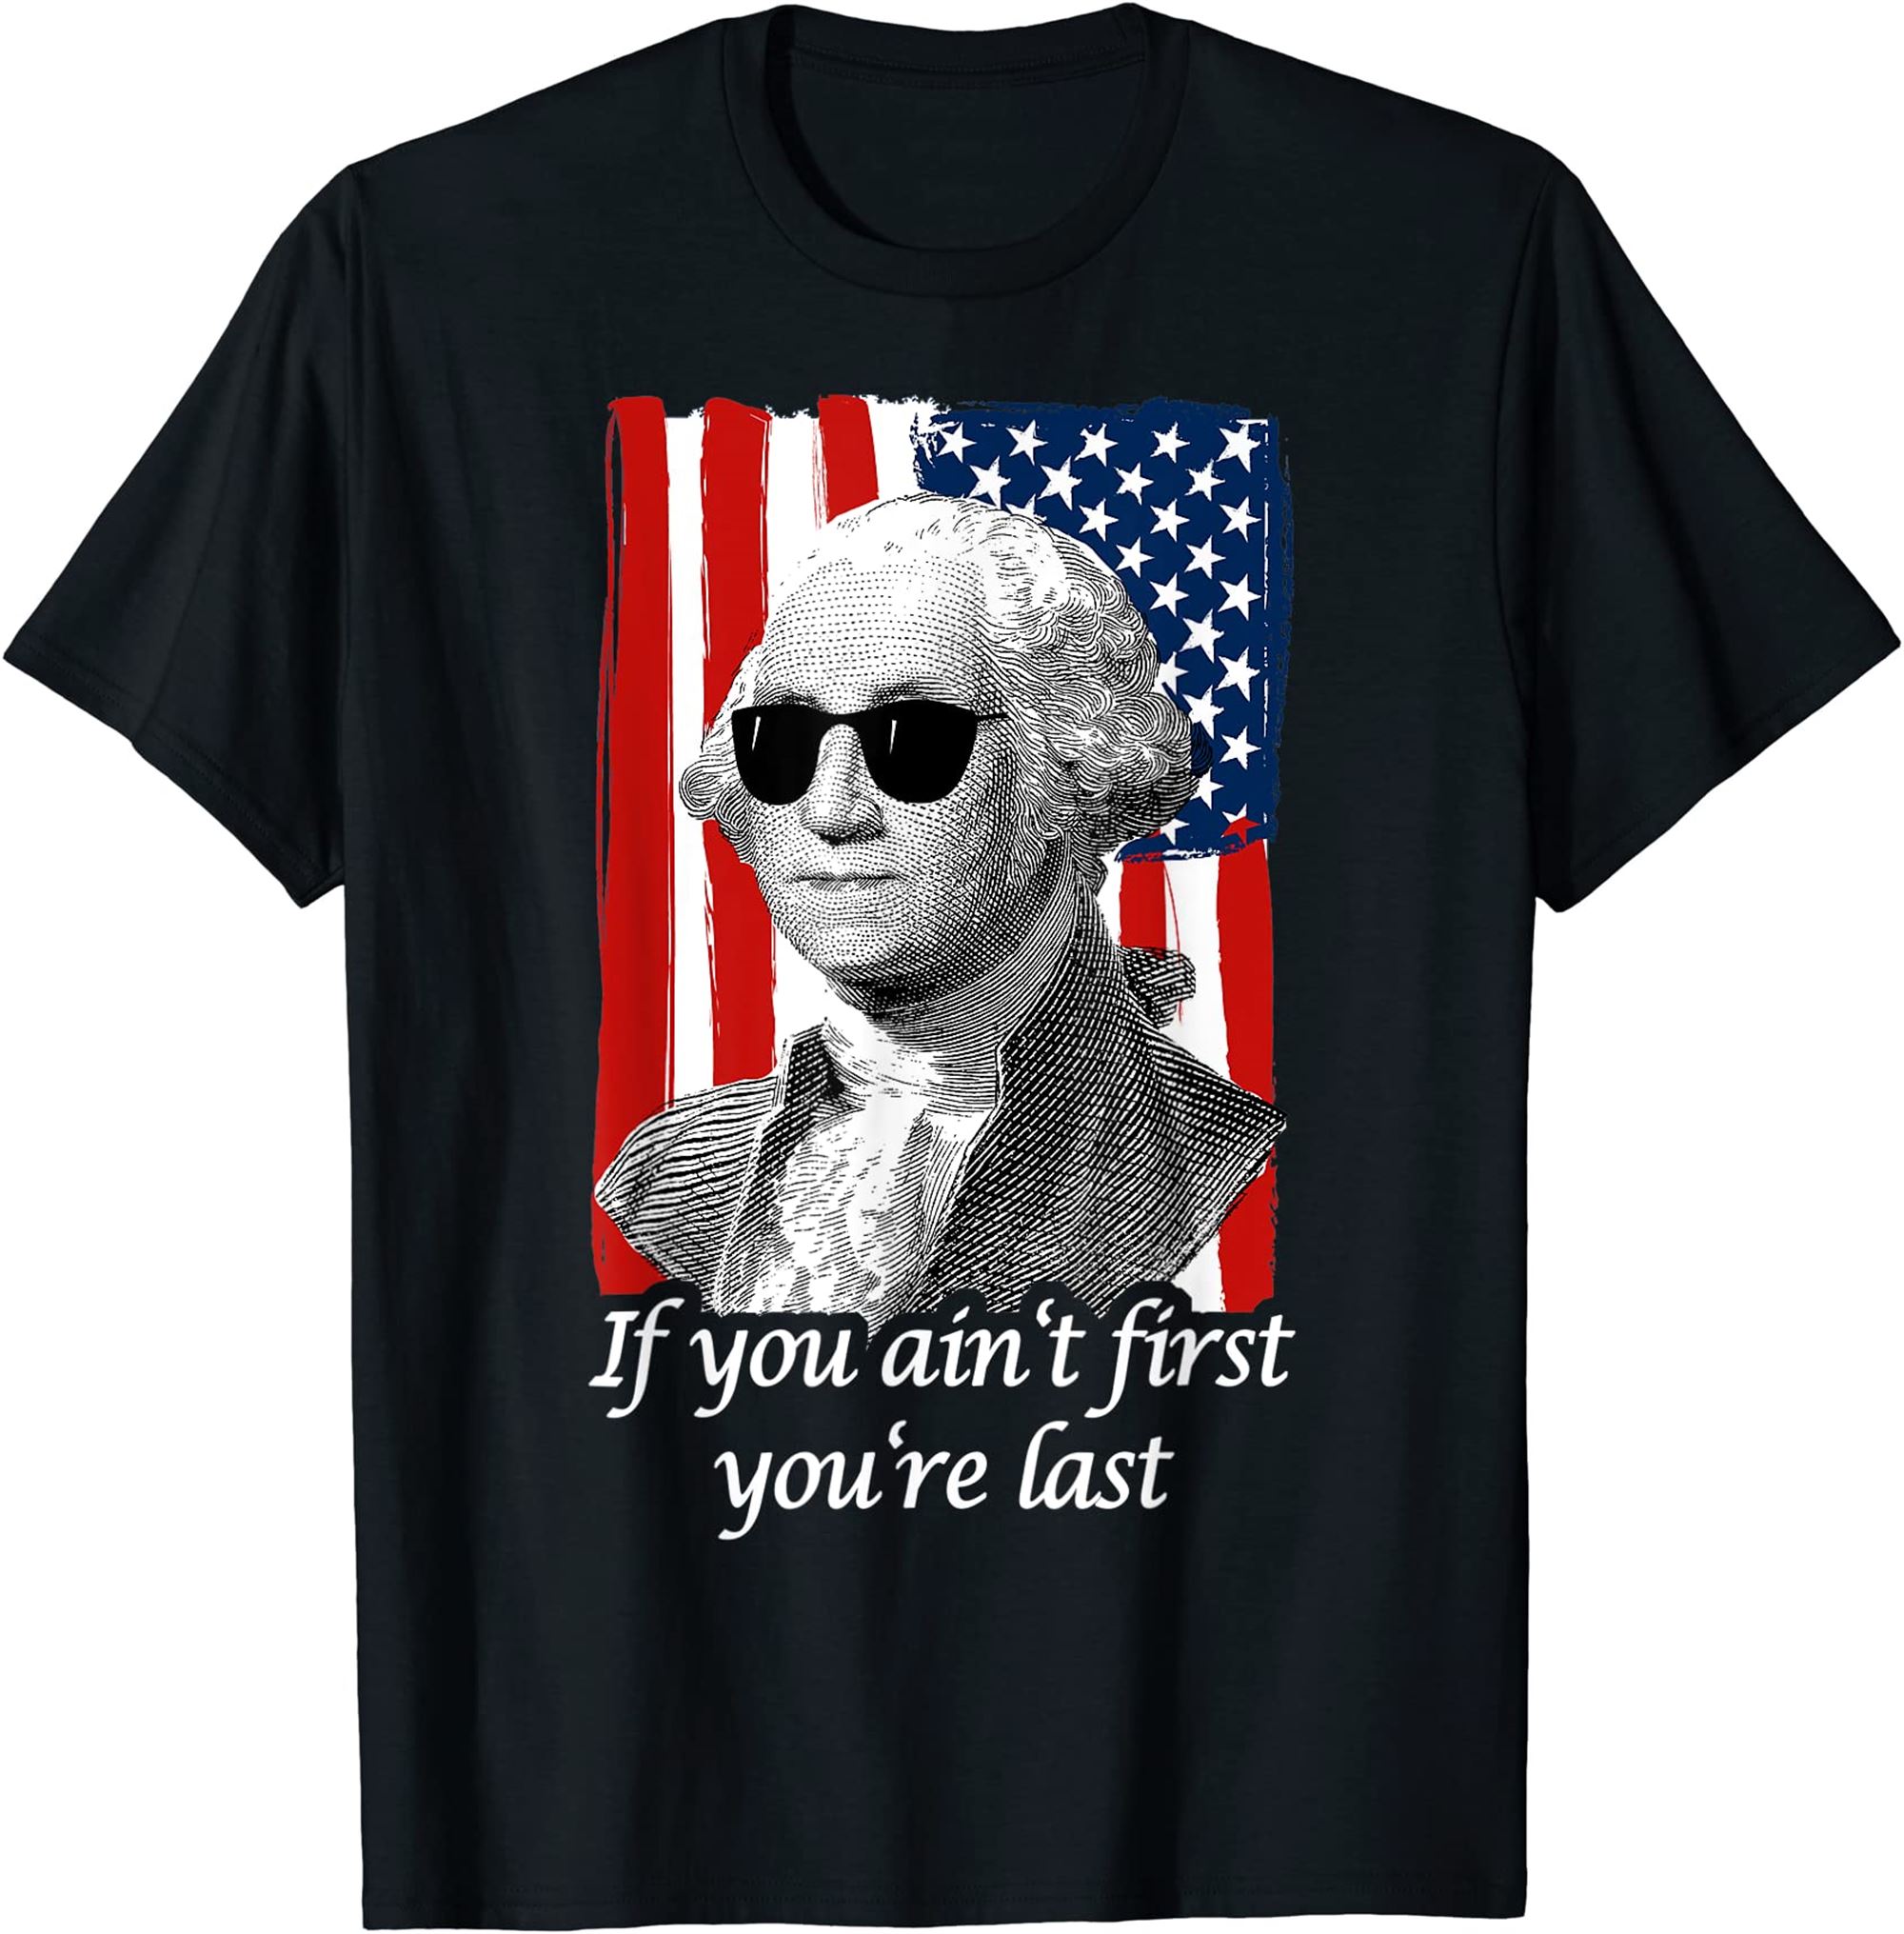 4th July Georg Washington Patriotic Quote Independence Day T-shirt Size Up To 5xl